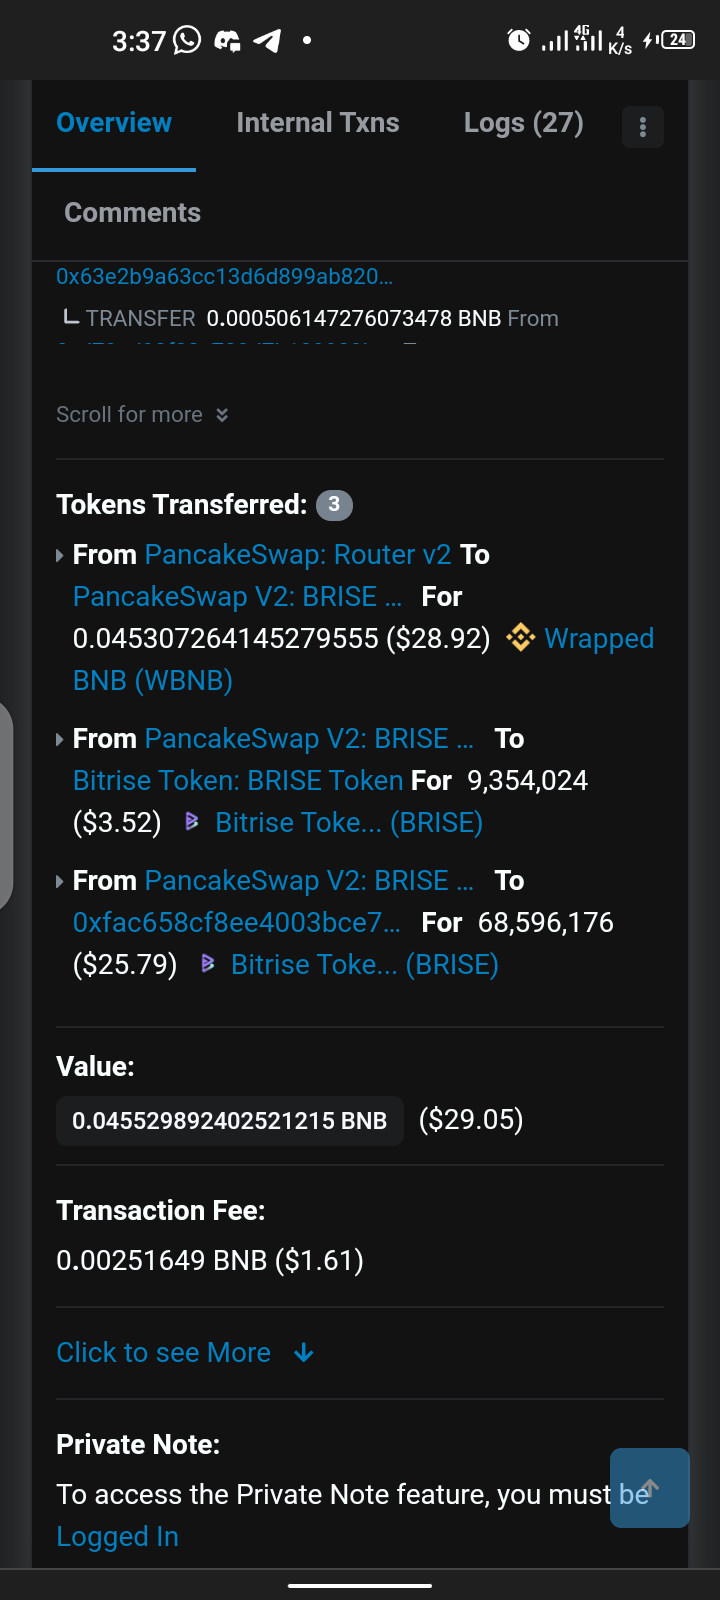 Bought tokens on pancake swap but not received them in wallet - English ...